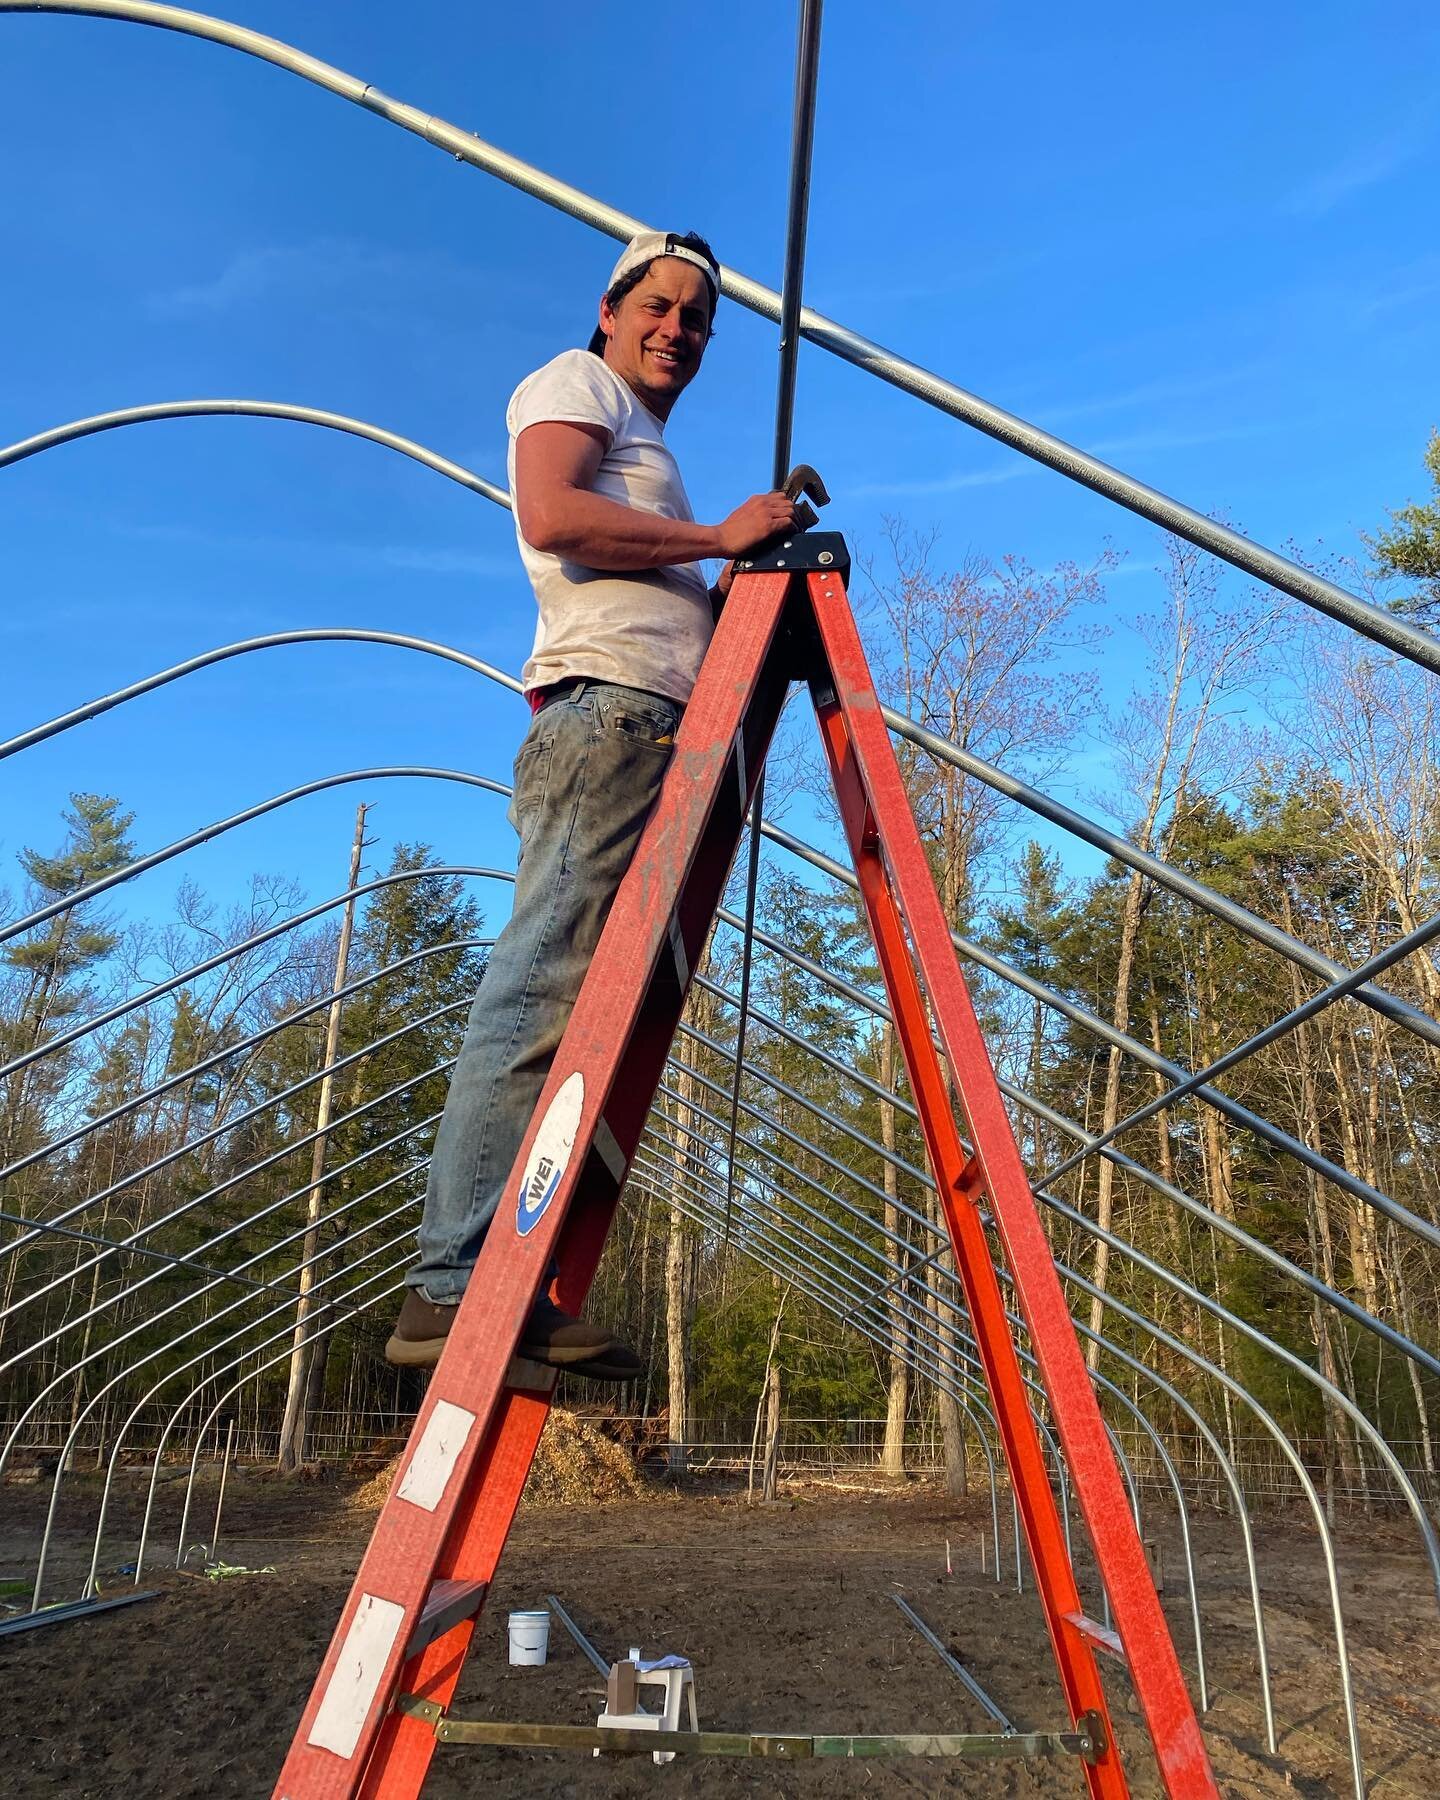 Tomer has been rocking the high tunnel build! Soon to be loaded with tomato, peppers and eggplant seedlings. Can&rsquo;t wait for summer harvests.